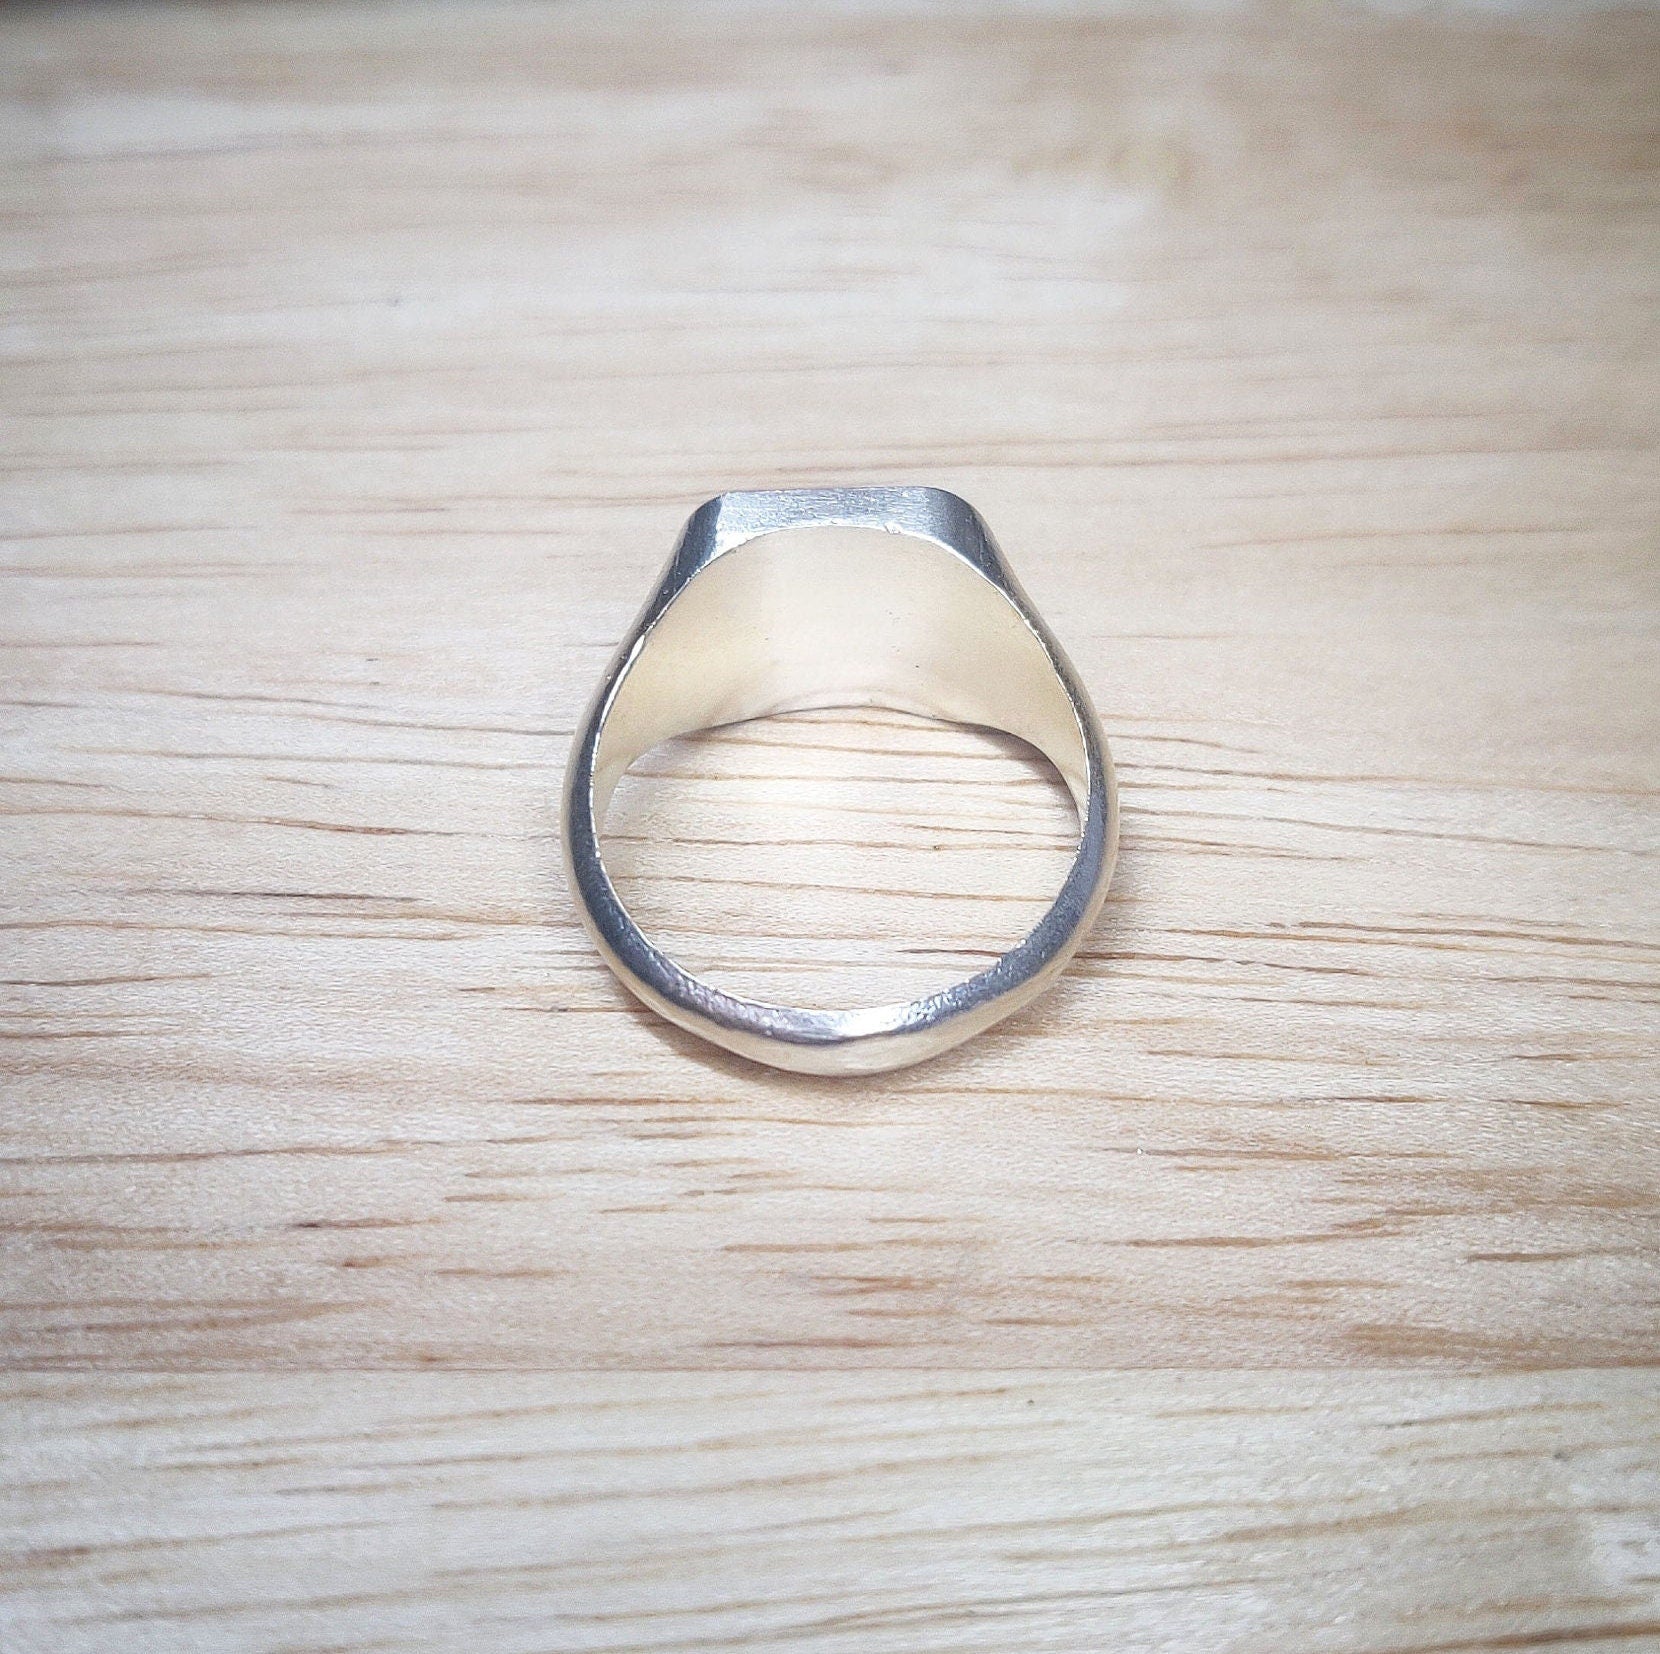 12mm Square Signet Ring. Blank Mens or Womens Signet Ring for Jewelry Making, Engraving and Gem setting in Silver or 9ct Yellow Gold